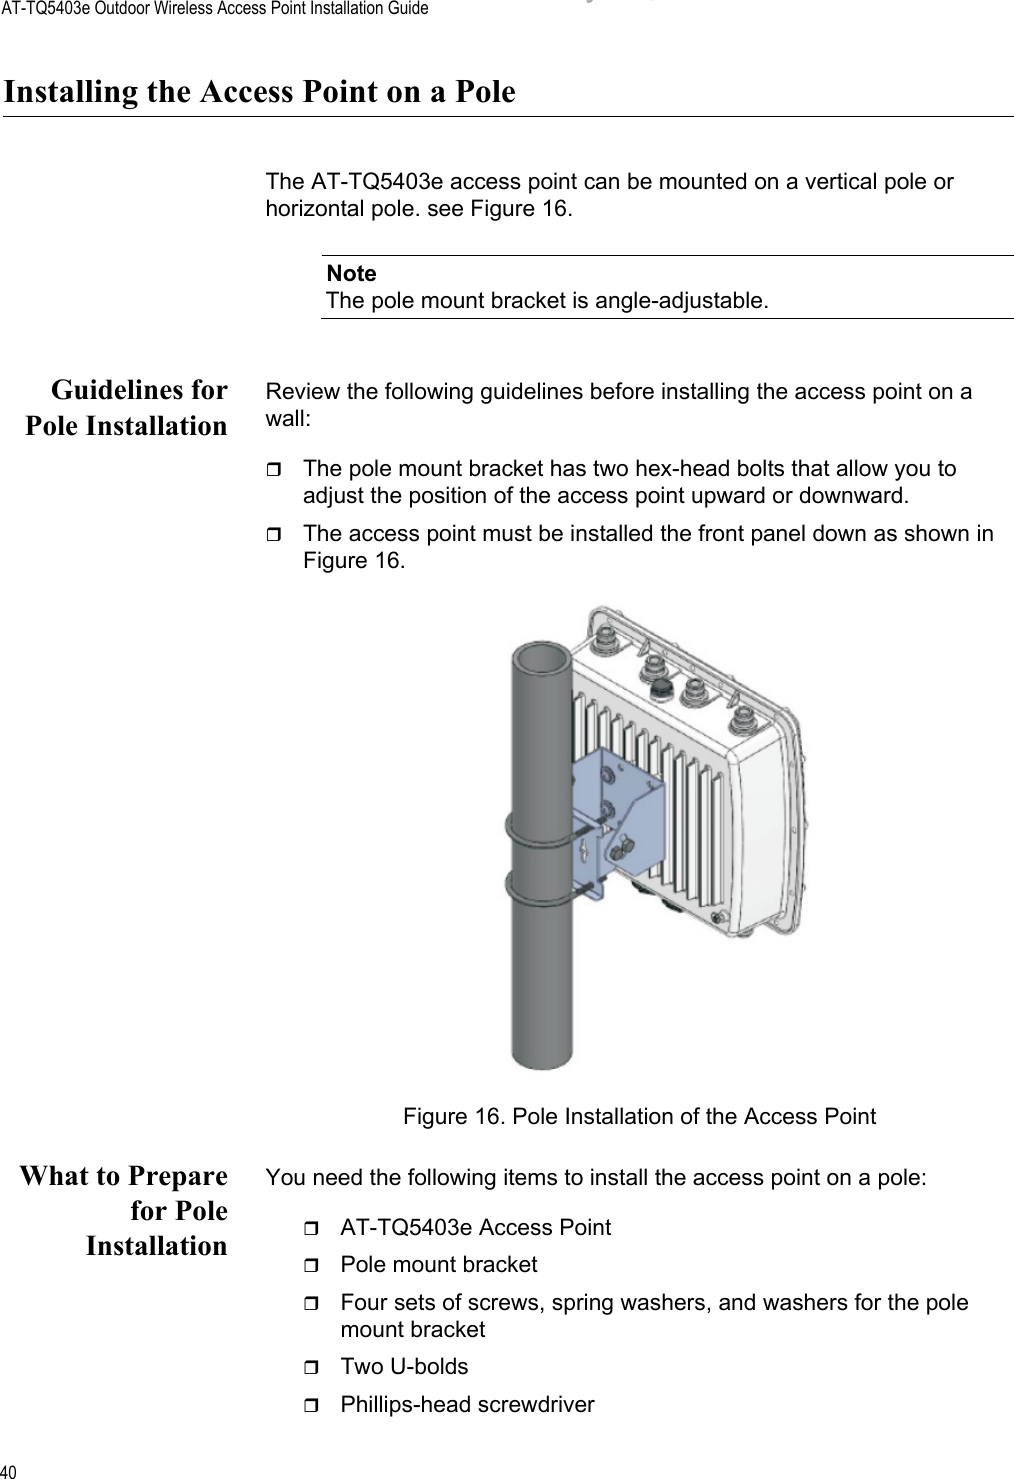 AT-TQ5403e Outdoor Wireless Access Point Installation Guide40Installing the Access Point on a PoleThe AT-TQ5403e access point can be mounted on a vertical pole or horizontal pole. see Figure 16. NoteThe pole mount bracket is angle-adjustable. Guidelines forPole InstallationReview the following guidelines before installing the access point on a wall:The pole mount bracket has two hex-head bolts that allow you to adjust the position of the access point upward or downward.The access point must be installed the front panel down as shown in Figure 16.Figure 16. Pole Installation of the Access PointWhat to Preparefor PoleInstallationYou need the following items to install the access point on a pole:AT-TQ5403e Access PointPole mount bracketFour sets of screws, spring washers, and washers for the pole mount bracketTwo U-boldsPhillips-head screwdriverDraft 5 on February 14, 2019